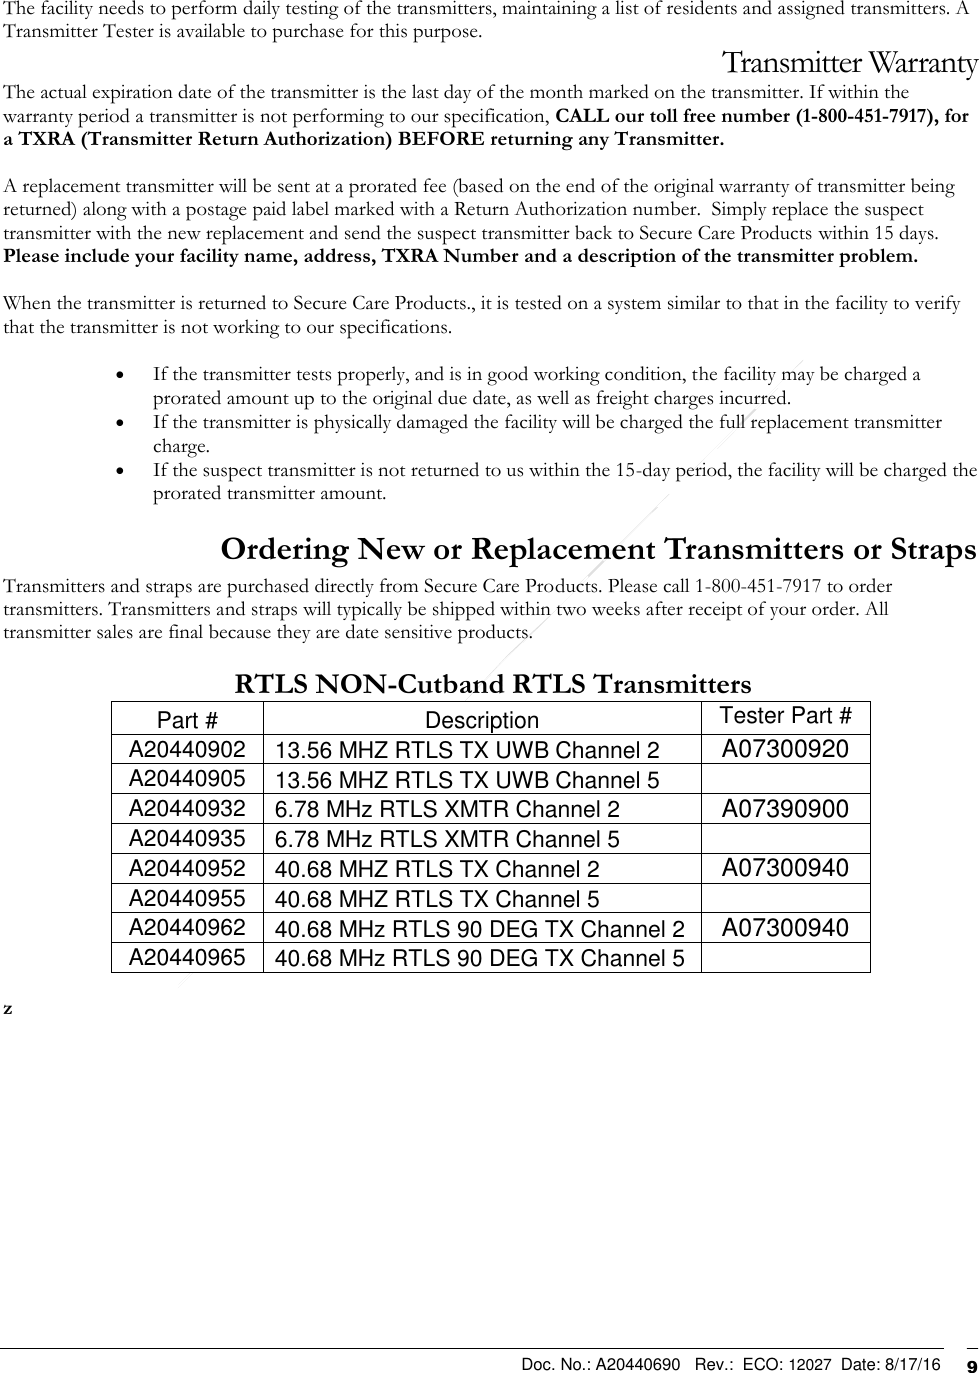  Doc. No.: A20440690   Rev.:  ECO: 12027  Date: 8/17/16              9  The facility needs to perform daily testing of the transmitters, maintaining a list of residents and assigned transmitters. A Transmitter Tester is available to purchase for this purpose. Transmitter Warranty The actual expiration date of the transmitter is the last day of the month marked on the transmitter. If within the warranty period a transmitter is not performing to our specification, CALL our toll free number (1-800-451-7917), for a TXRA (Transmitter Return Authorization) BEFORE returning any Transmitter.   A replacement transmitter will be sent at a prorated fee (based on the end of the original warranty of transmitter being returned) along with a postage paid label marked with a Return Authorization number.  Simply replace the suspect transmitter with the new replacement and send the suspect transmitter back to Secure Care Products within 15 days.  Please include your facility name, address, TXRA Number and a description of the transmitter problem.    When the transmitter is returned to Secure Care Products., it is tested on a system similar to that in the facility to verify that the transmitter is not working to our specifications.    If the transmitter tests properly, and is in good working condition, the facility may be charged a prorated amount up to the original due date, as well as freight charges incurred.   If the transmitter is physically damaged the facility will be charged the full replacement transmitter charge.    If the suspect transmitter is not returned to us within the 15-day period, the facility will be charged the prorated transmitter amount.  Ordering New or Replacement Transmitters or Straps Transmitters and straps are purchased directly from Secure Care Products. Please call 1-800-451-7917 to order transmitters. Transmitters and straps will typically be shipped within two weeks after receipt of your order. All transmitter sales are final because they are date sensitive products.    RTLS NON-Cutband RTLS Transmitters Part # Description Tester Part # A20440902 13.56 MHZ RTLS TX UWB Channel 2 A07300920 A20440905 13.56 MHZ RTLS TX UWB Channel 5  A20440932 6.78 MHz RTLS XMTR Channel 2 A07390900 A20440935 6.78 MHz RTLS XMTR Channel 5  A20440952 40.68 MHZ RTLS TX Channel 2 A07300940 A20440955 40.68 MHZ RTLS TX Channel 5  A20440962 40.68 MHz RTLS 90 DEG TX Channel 2 A07300940 A20440965 40.68 MHz RTLS 90 DEG TX Channel 5   z   